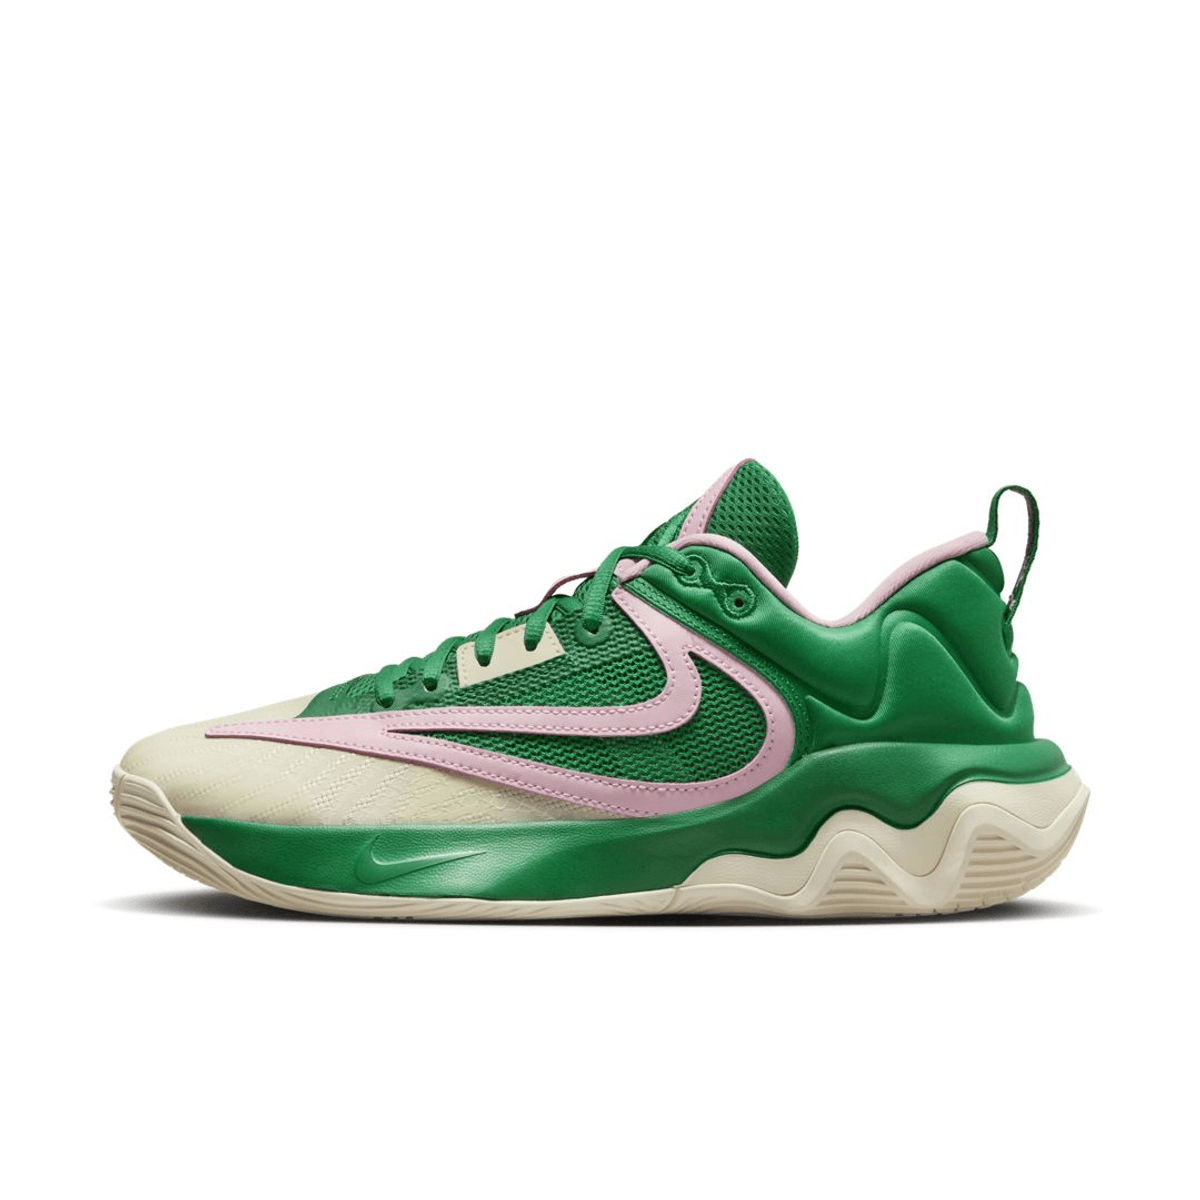 The Nike Giannis Immortality 3 Receives A New Green and Pink Colorway